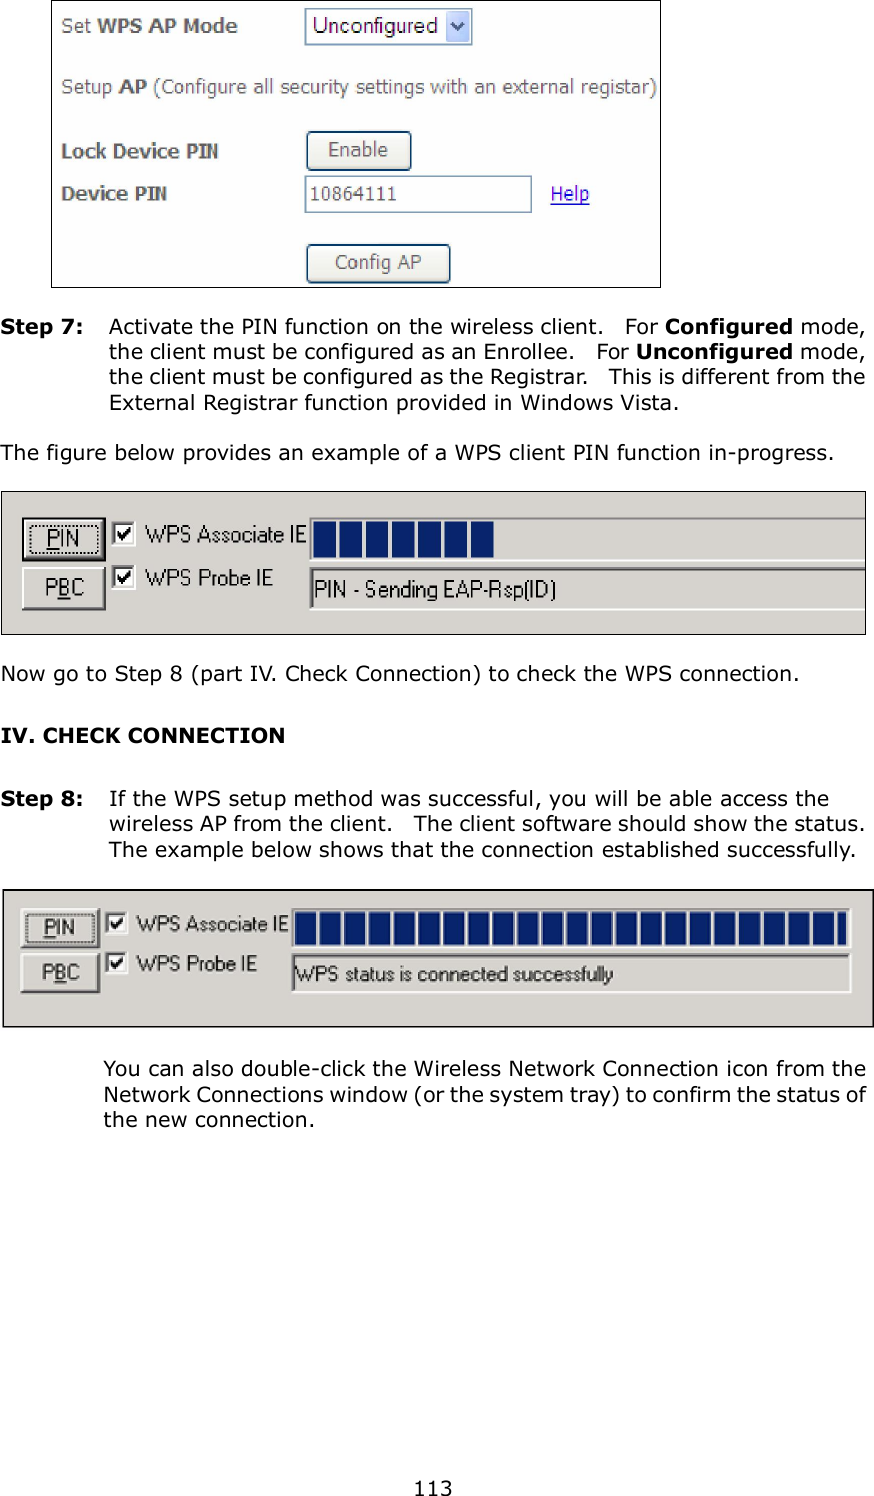  113       Step 7:  Activate the PIN function on the wireless client.    For Configured mode, the client must be configured as an Enrollee.    For Unconfigured mode, the client must be configured as the Registrar.   This is different from the External Registrar function provided in Windows Vista.        The figure below provides an example of a WPS client PIN function in-progress.    Now go to Step 8 (part IV. Check Connection) to check the WPS connection. IV. CHECK CONNECTION Step 8:  If the WPS setup method was successful, you will be able access the wireless AP from the client.    The client software should show the status.   The example below shows that the connection established successfully.      You can also double-click the Wireless Network Connection icon from the Network Connections window (or the system tray) to confirm the status of the new connection. 